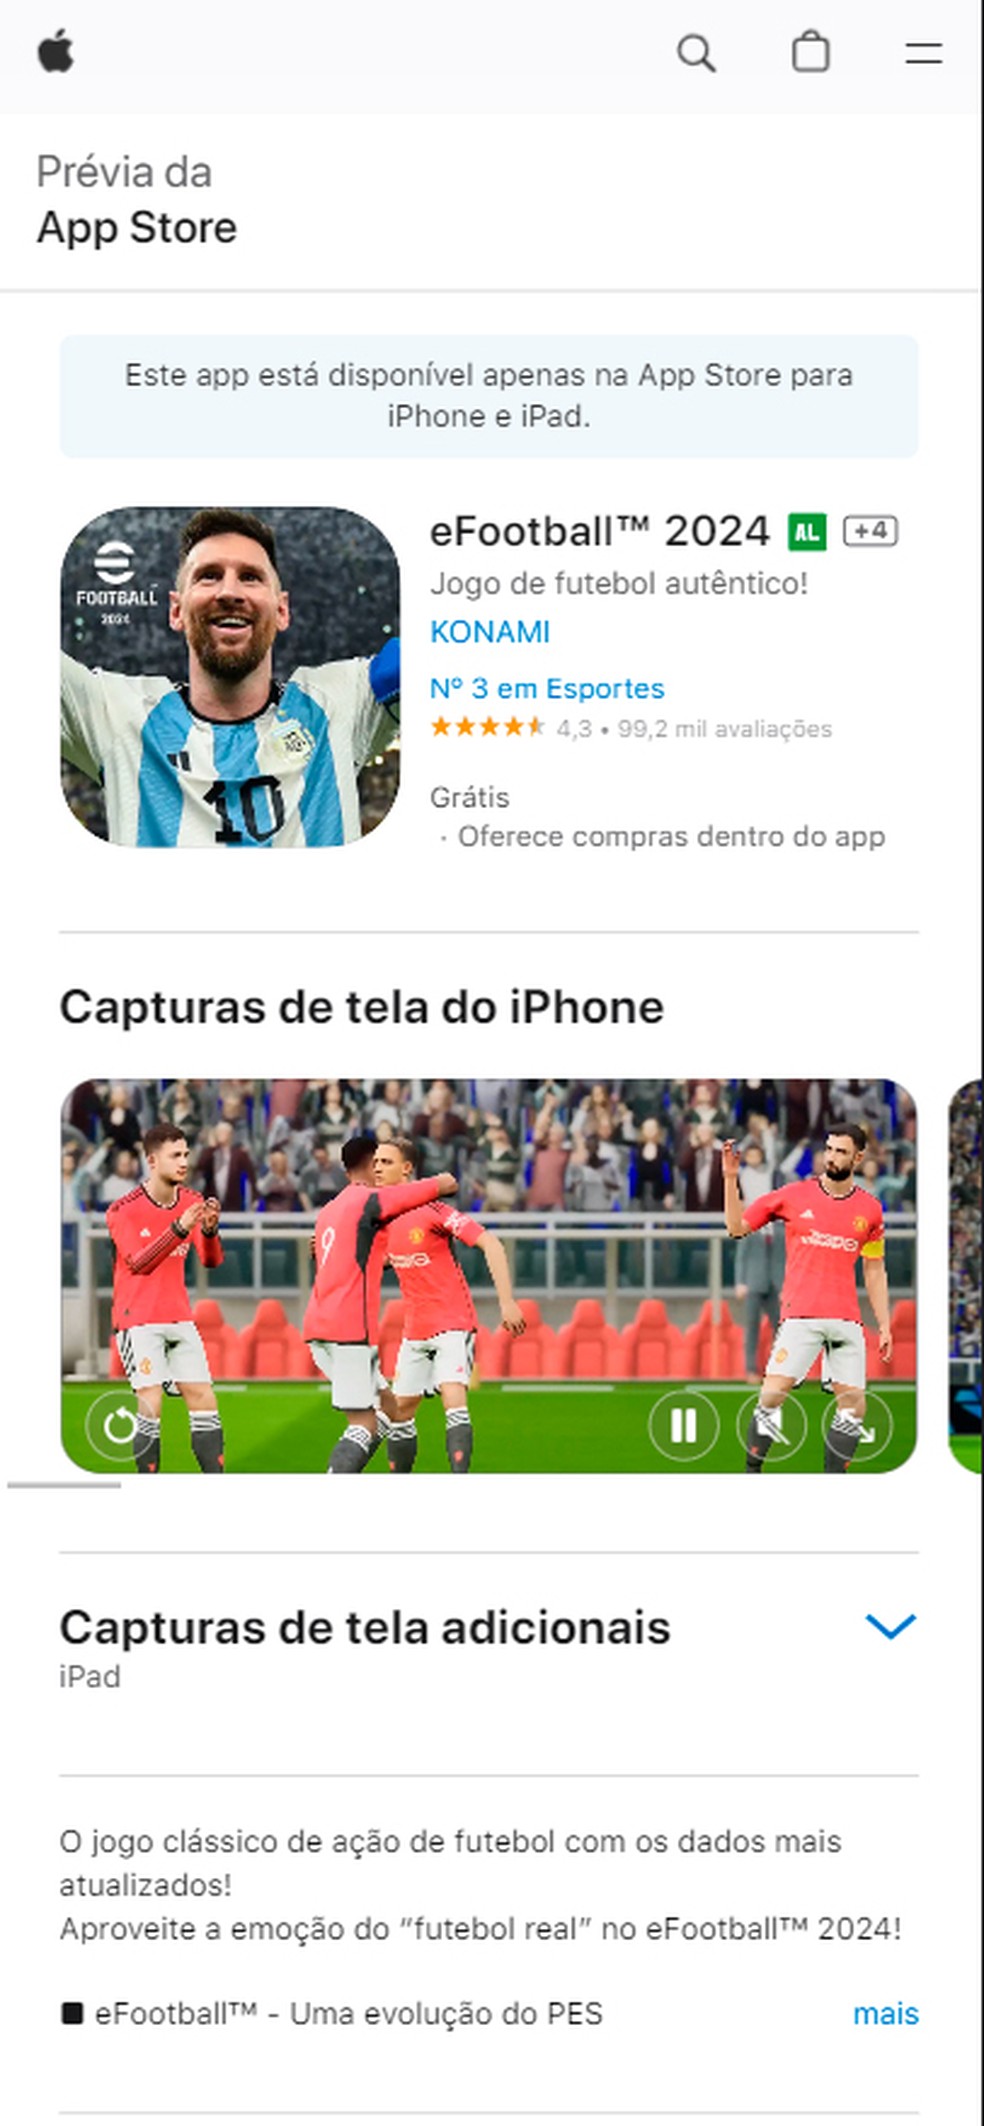 eFootball 2024 8.1 iOS - Free download for iPhone